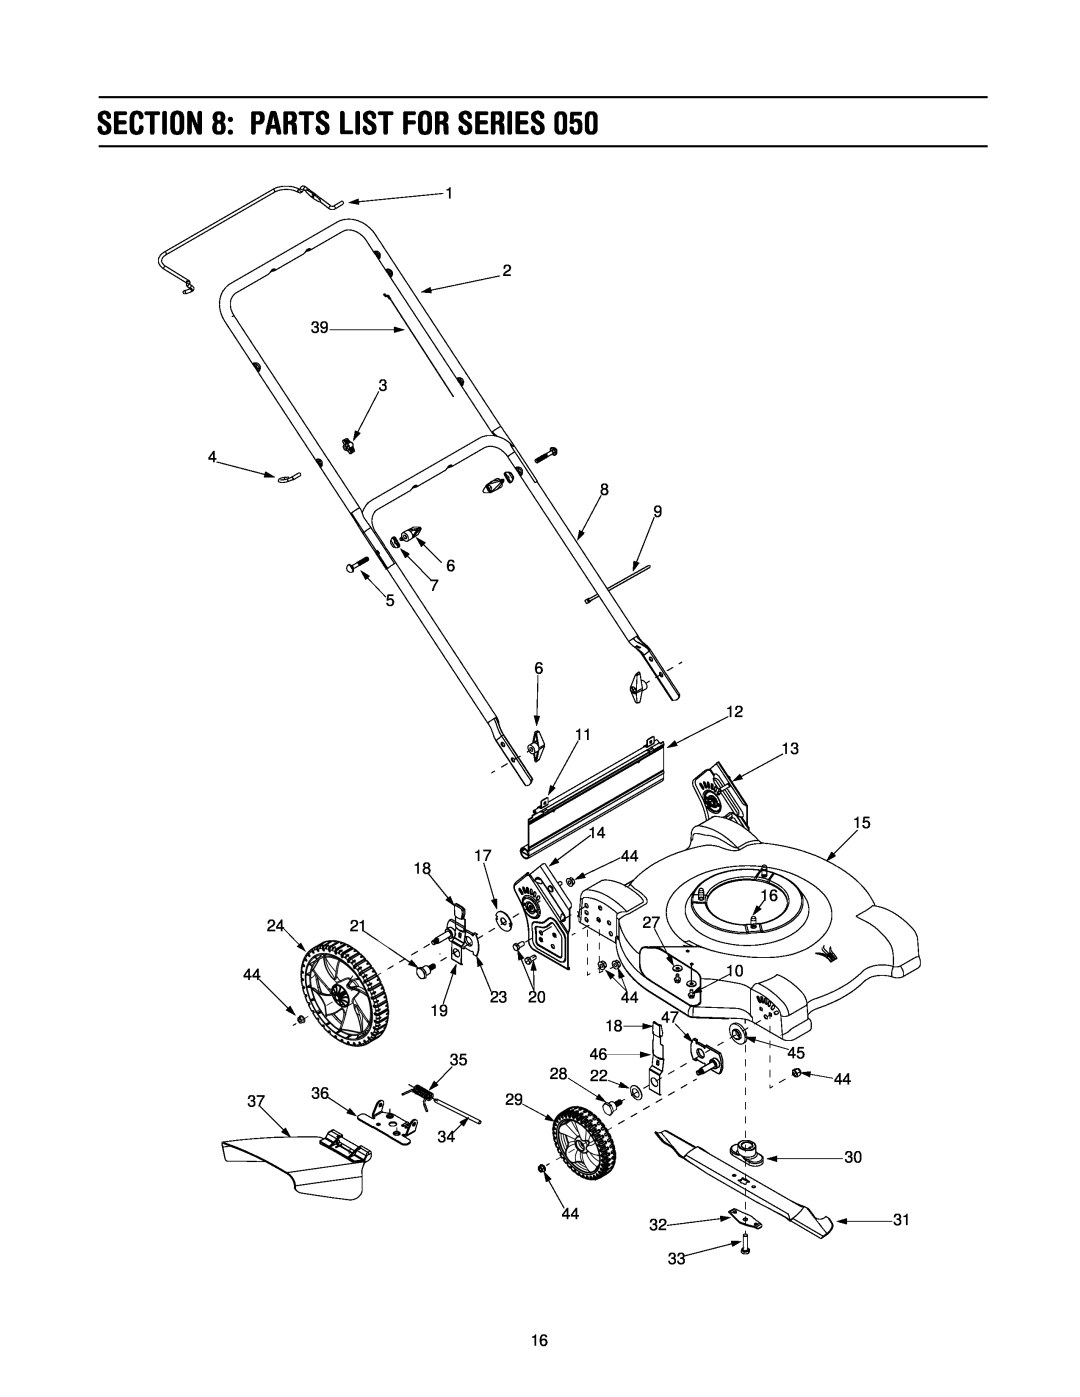 MTD 50 manual Parts List For Series 